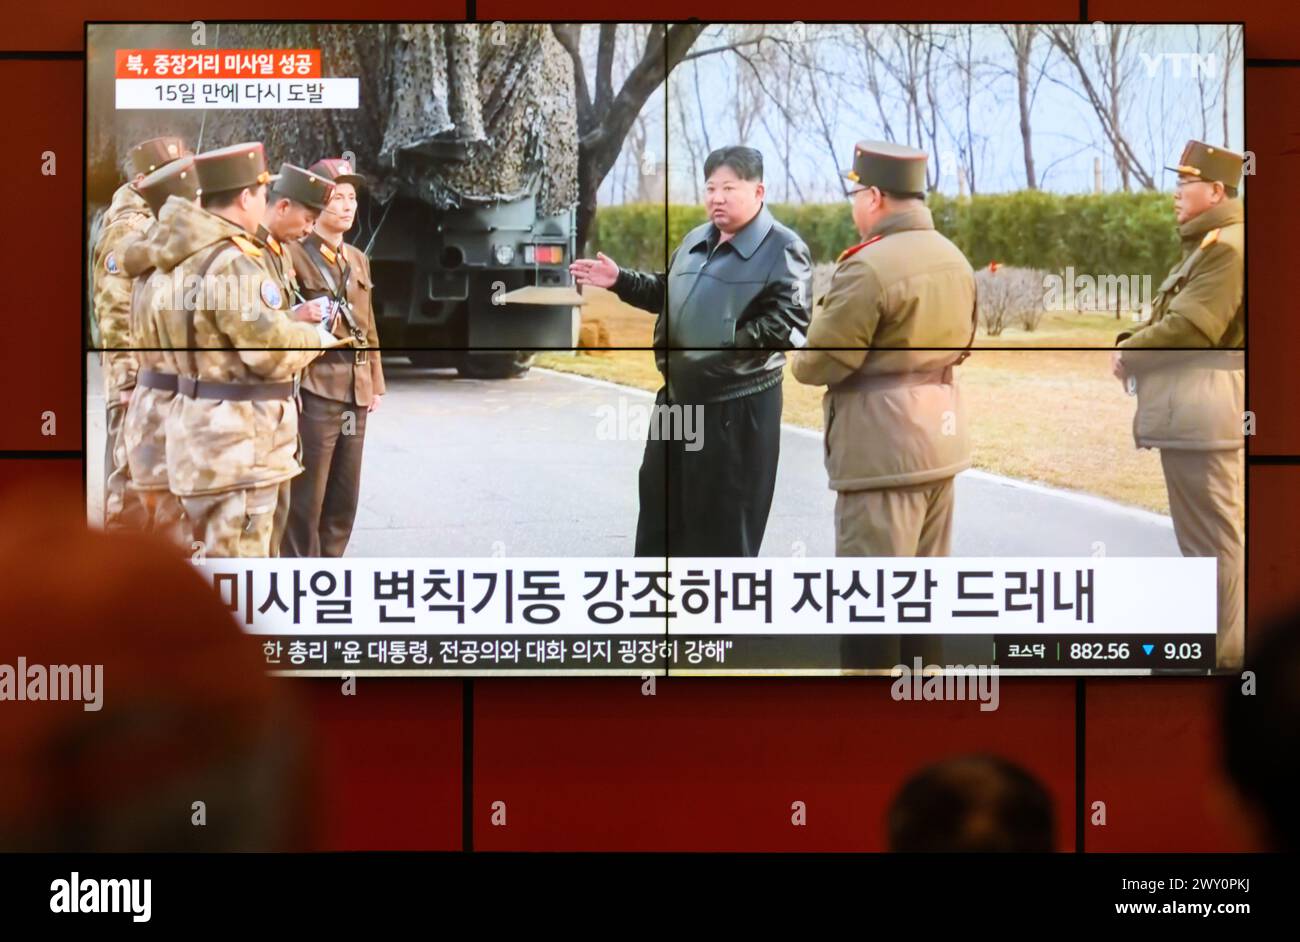 South Korea's 24-hour YTN shows North Korean leader Kim Jong Un(C) inspecting the launch of a Hwasongpho-16B, a new type of intermediate-range solid-fueled ballistic missile equipped with a newly-developed hypersonic gliding warhead, on a TV at Gangnam Express Bus Terminal in Seoul. North Korea said on April 3 that it successfully test-fired a new type of intermediate-range solid-fueled ballistic missile equipped with a newly-developed hypersonic glide warhead, adding that all missiles developed by the North Korea now have solid fuel and nuclear warhead control capabilities.North Korean leader Stock Photo